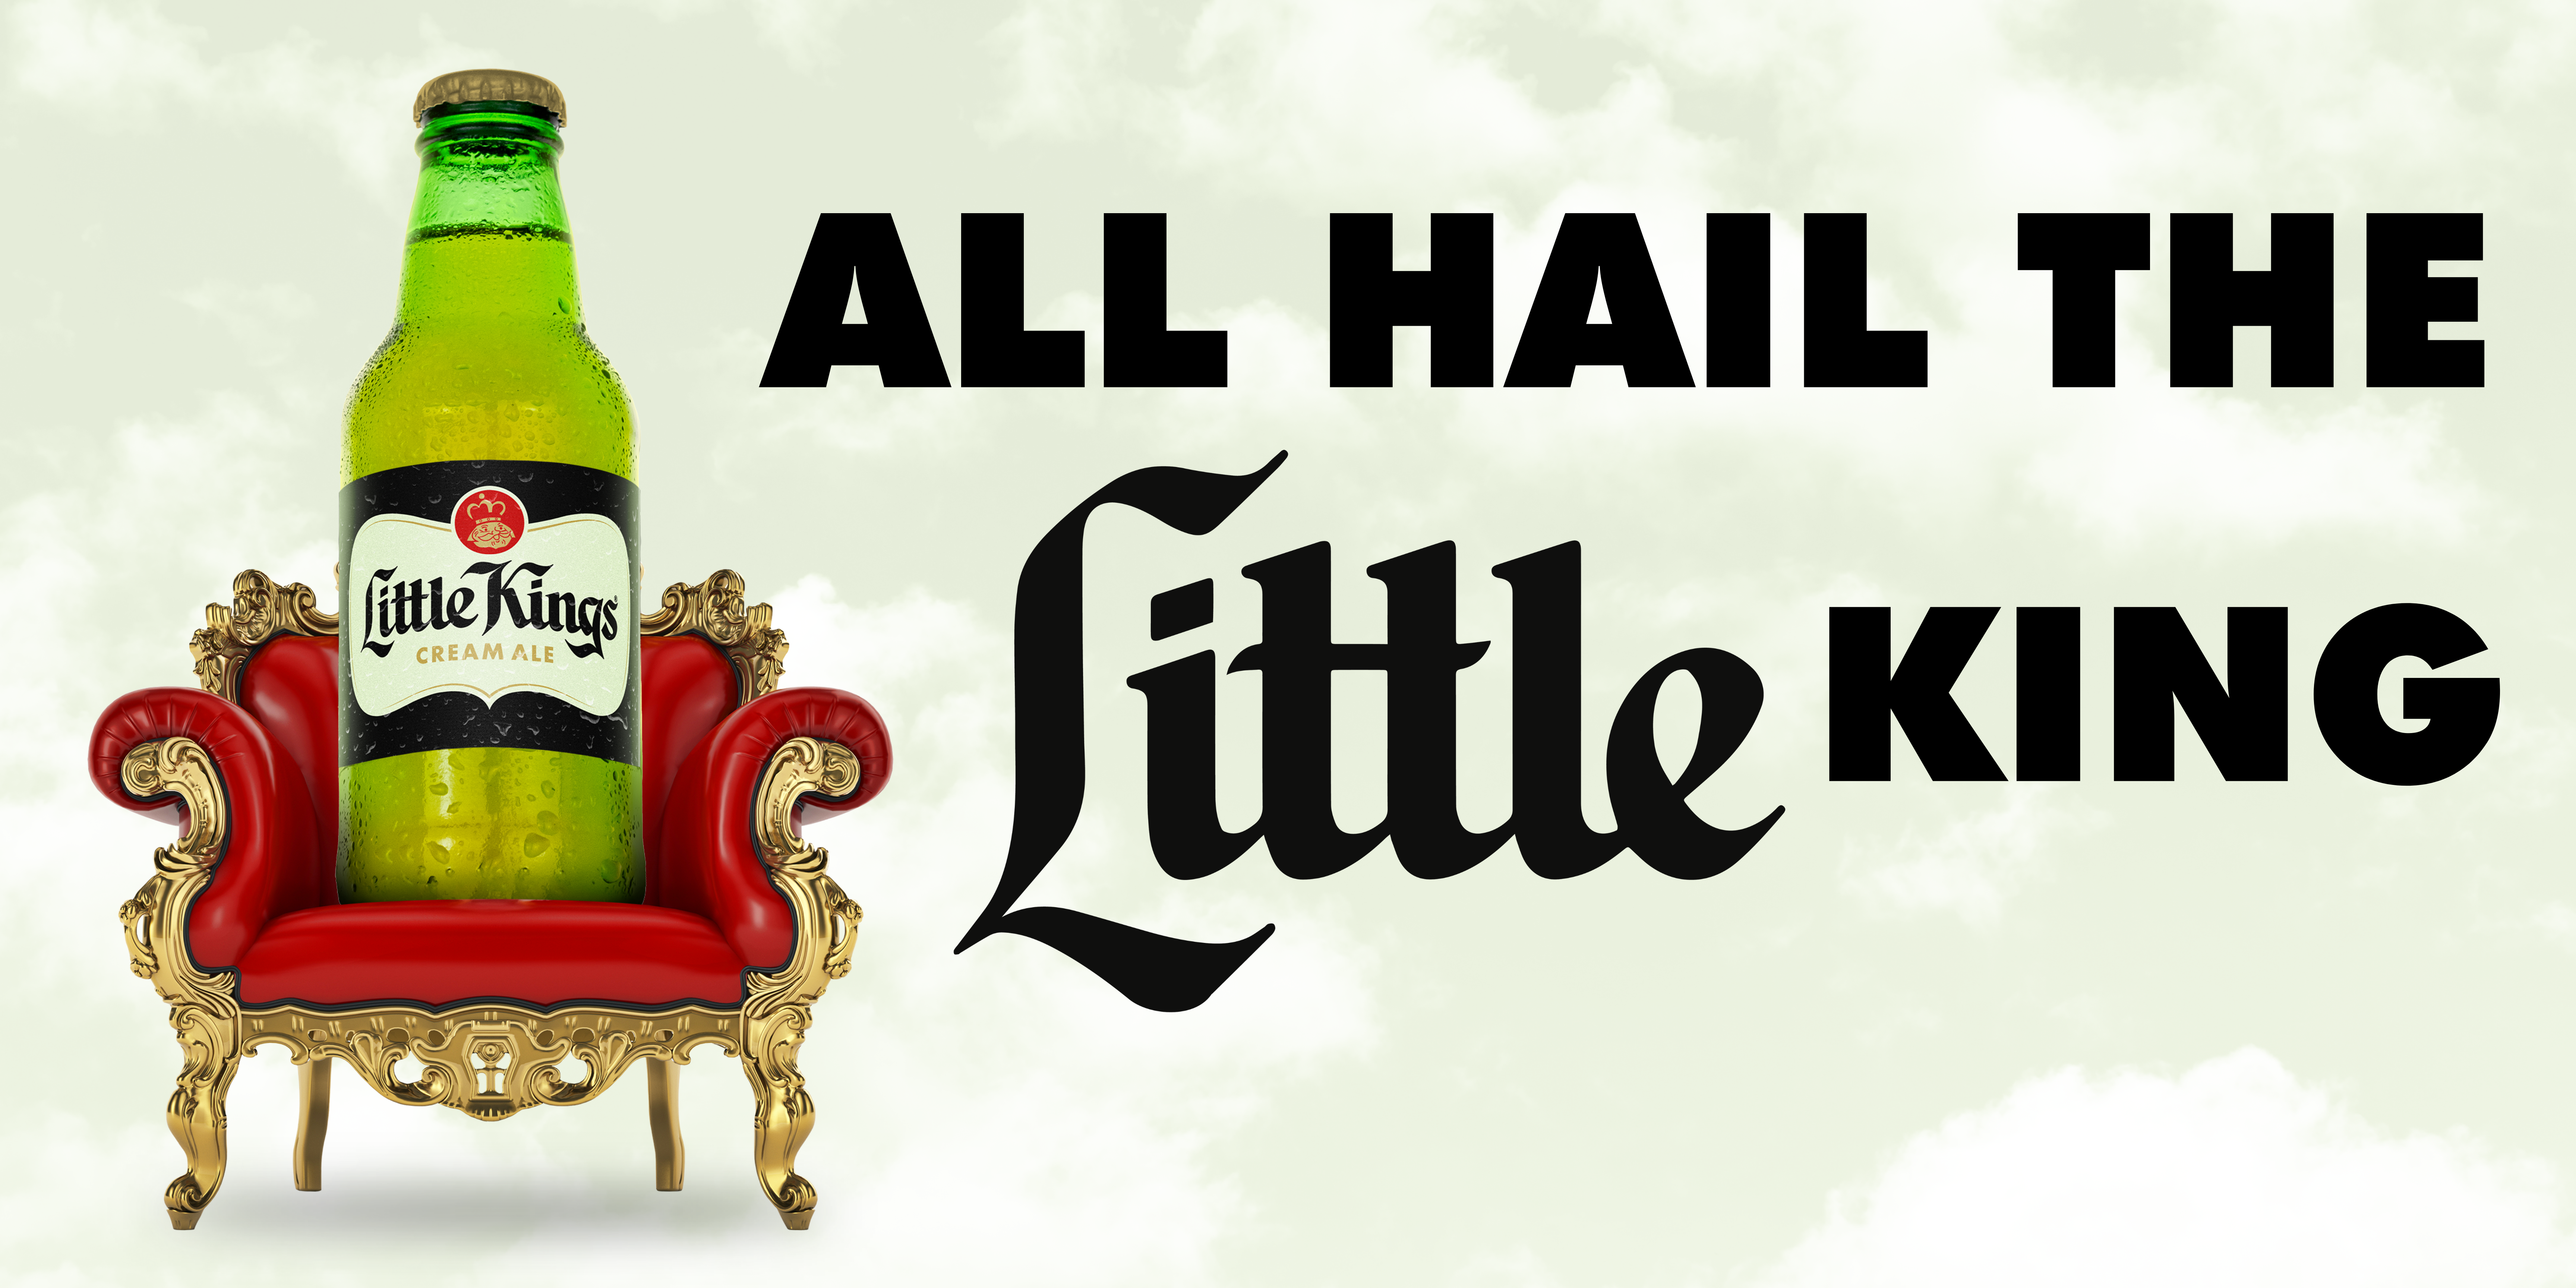 Text that reads "All hail the little king." Underneath the text is an image of a Little Kings Bottle sitting on a red leather throne.